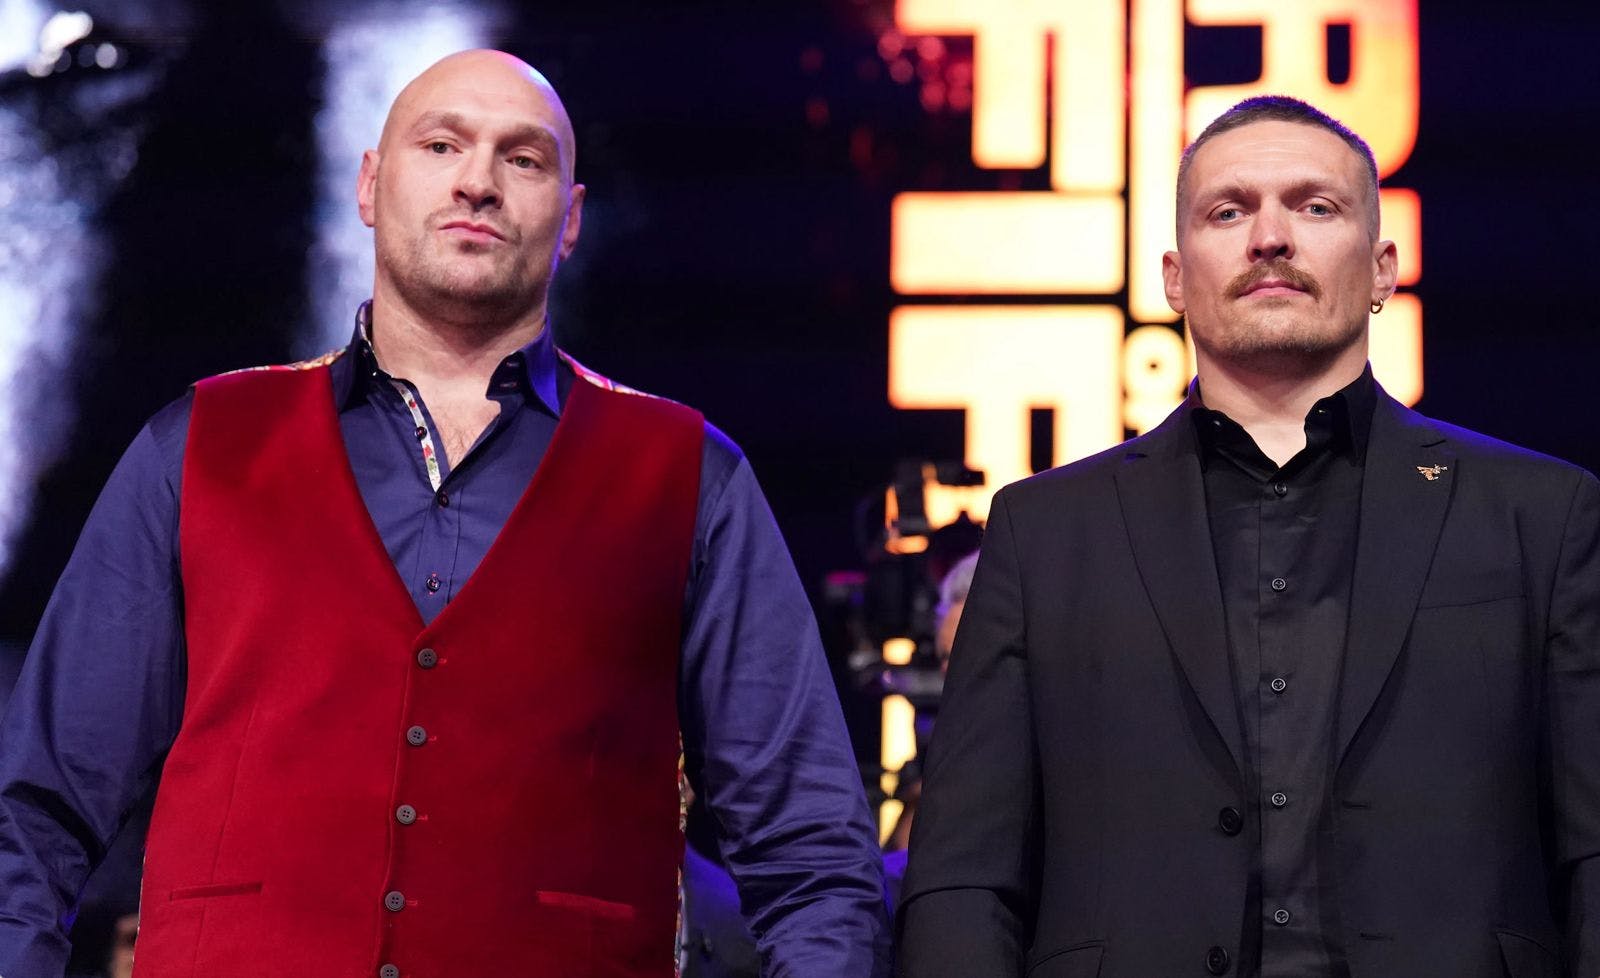 FURY VS USYK LIVE: YOUR VIEWS